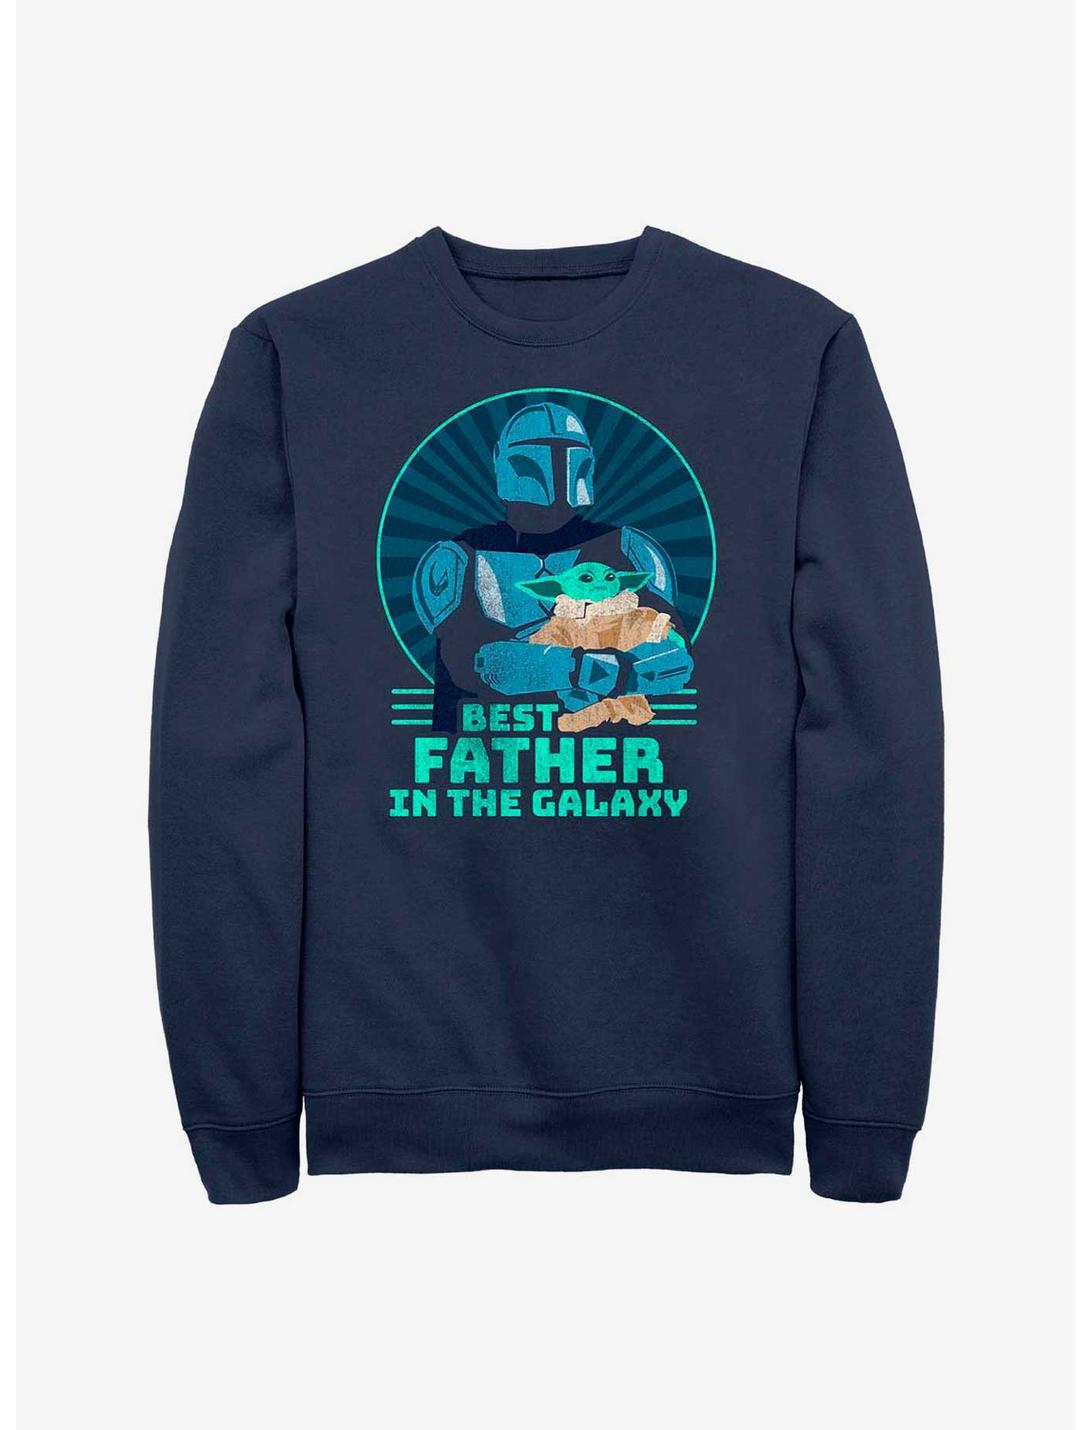 Star Wars The Mandalorian Best Father in the Galaxy Sweatshirt, NAVY, hi-res